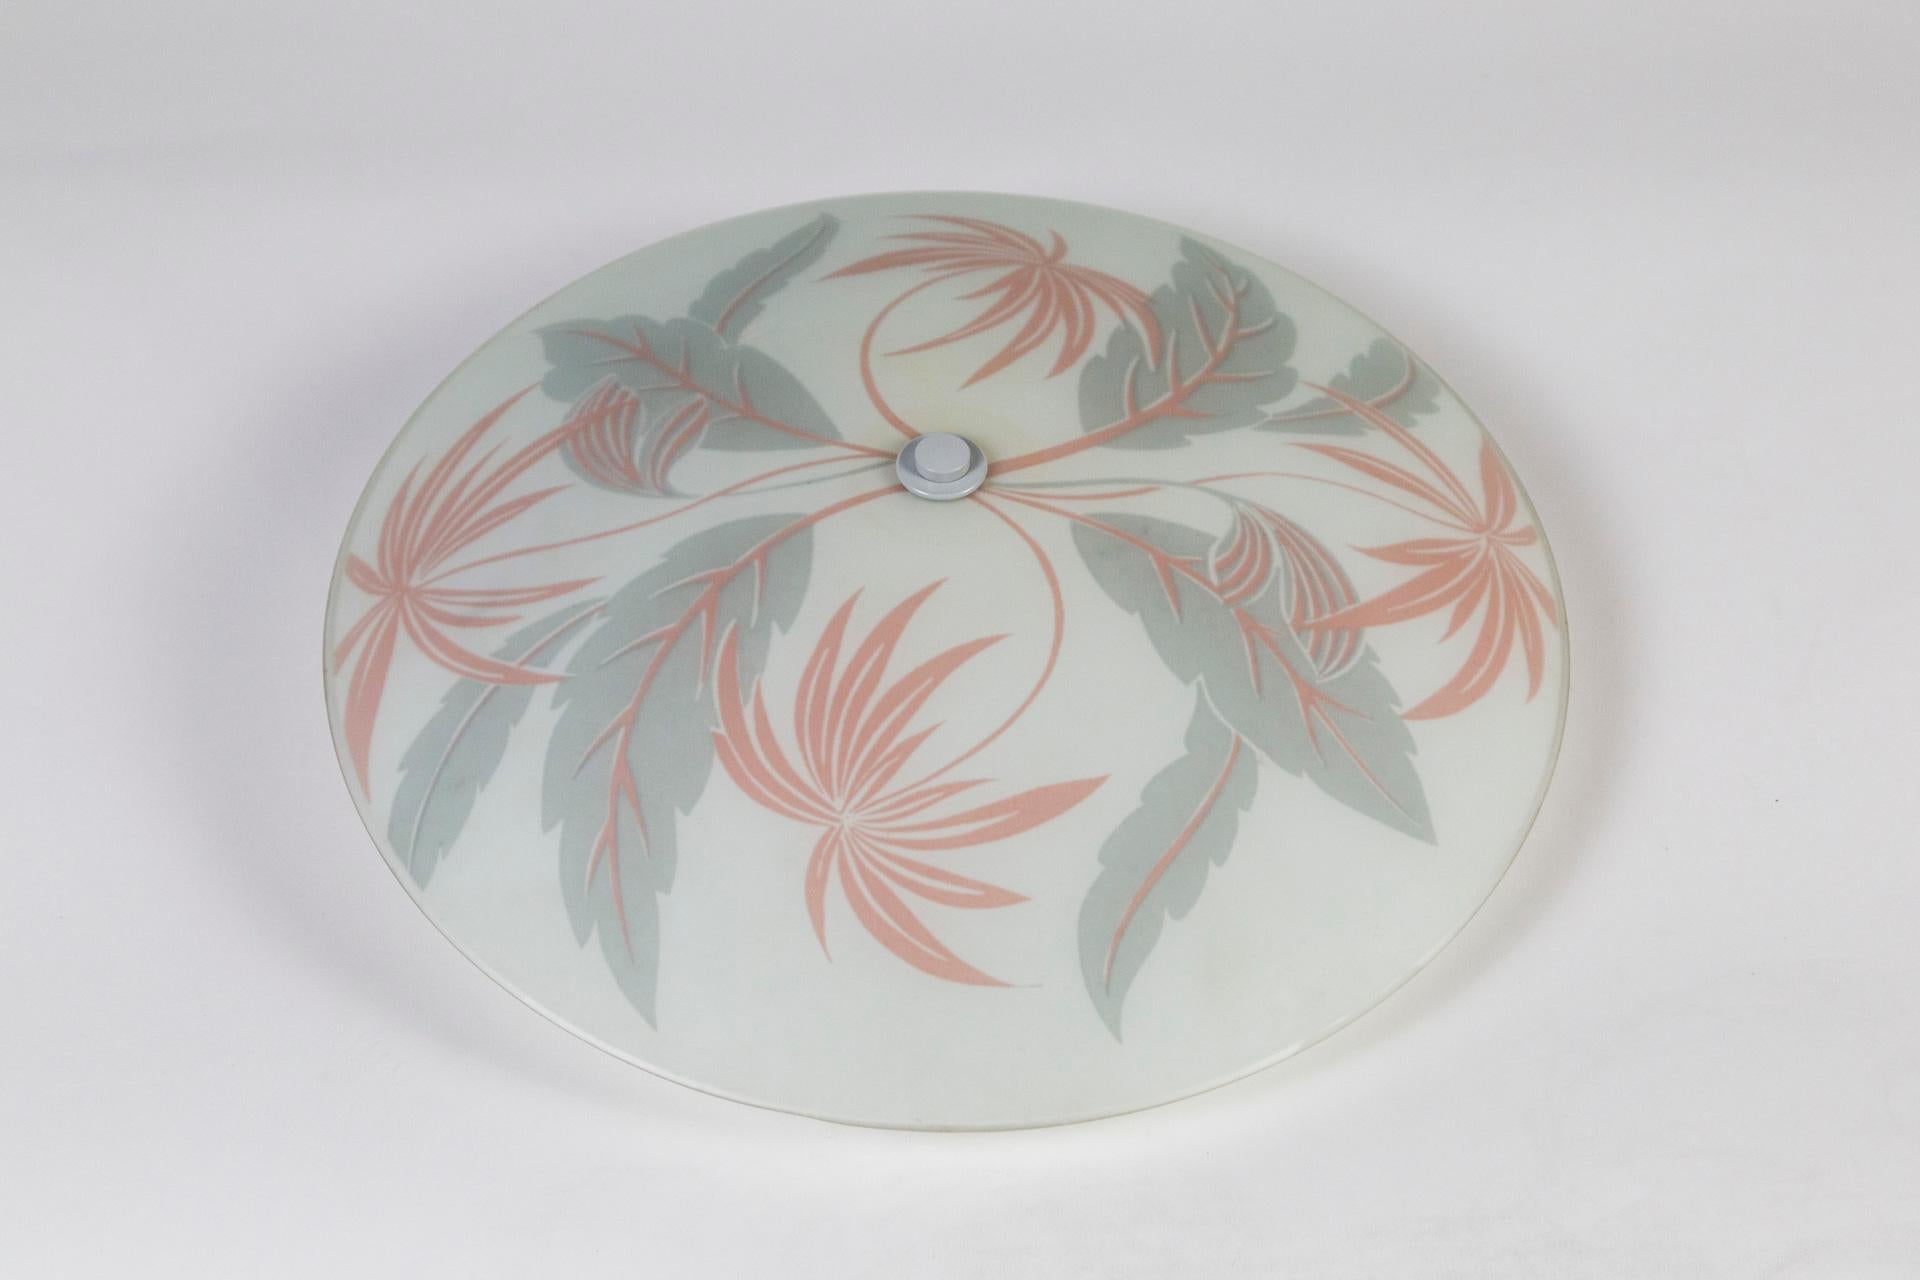 Palm Beach style, frosted glass, curved disk wall or ceiling light with printed pale gray and coral flora, 1950s glass newly wired with a 3-light cluster. The price listed is for one light. We have two available ($1,300 for 2 lights). Measures: